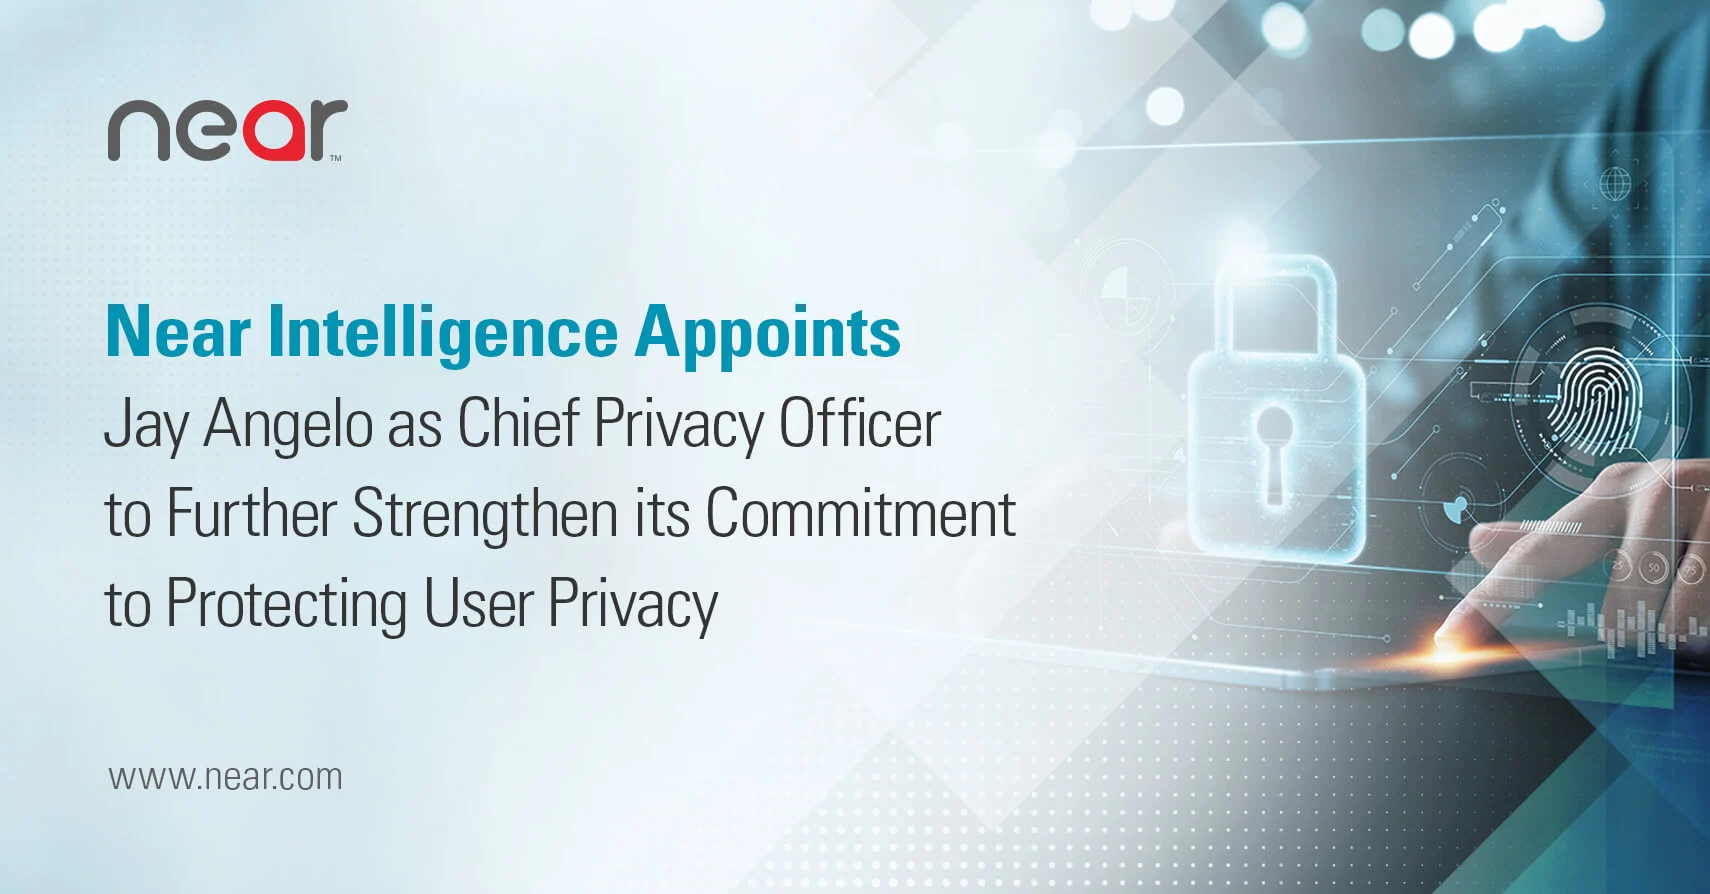 Near Intelligence Appoints Jay Angelo as Chief Privacy Officer to Further Strengthen its Commitment to Protecting User Privacy